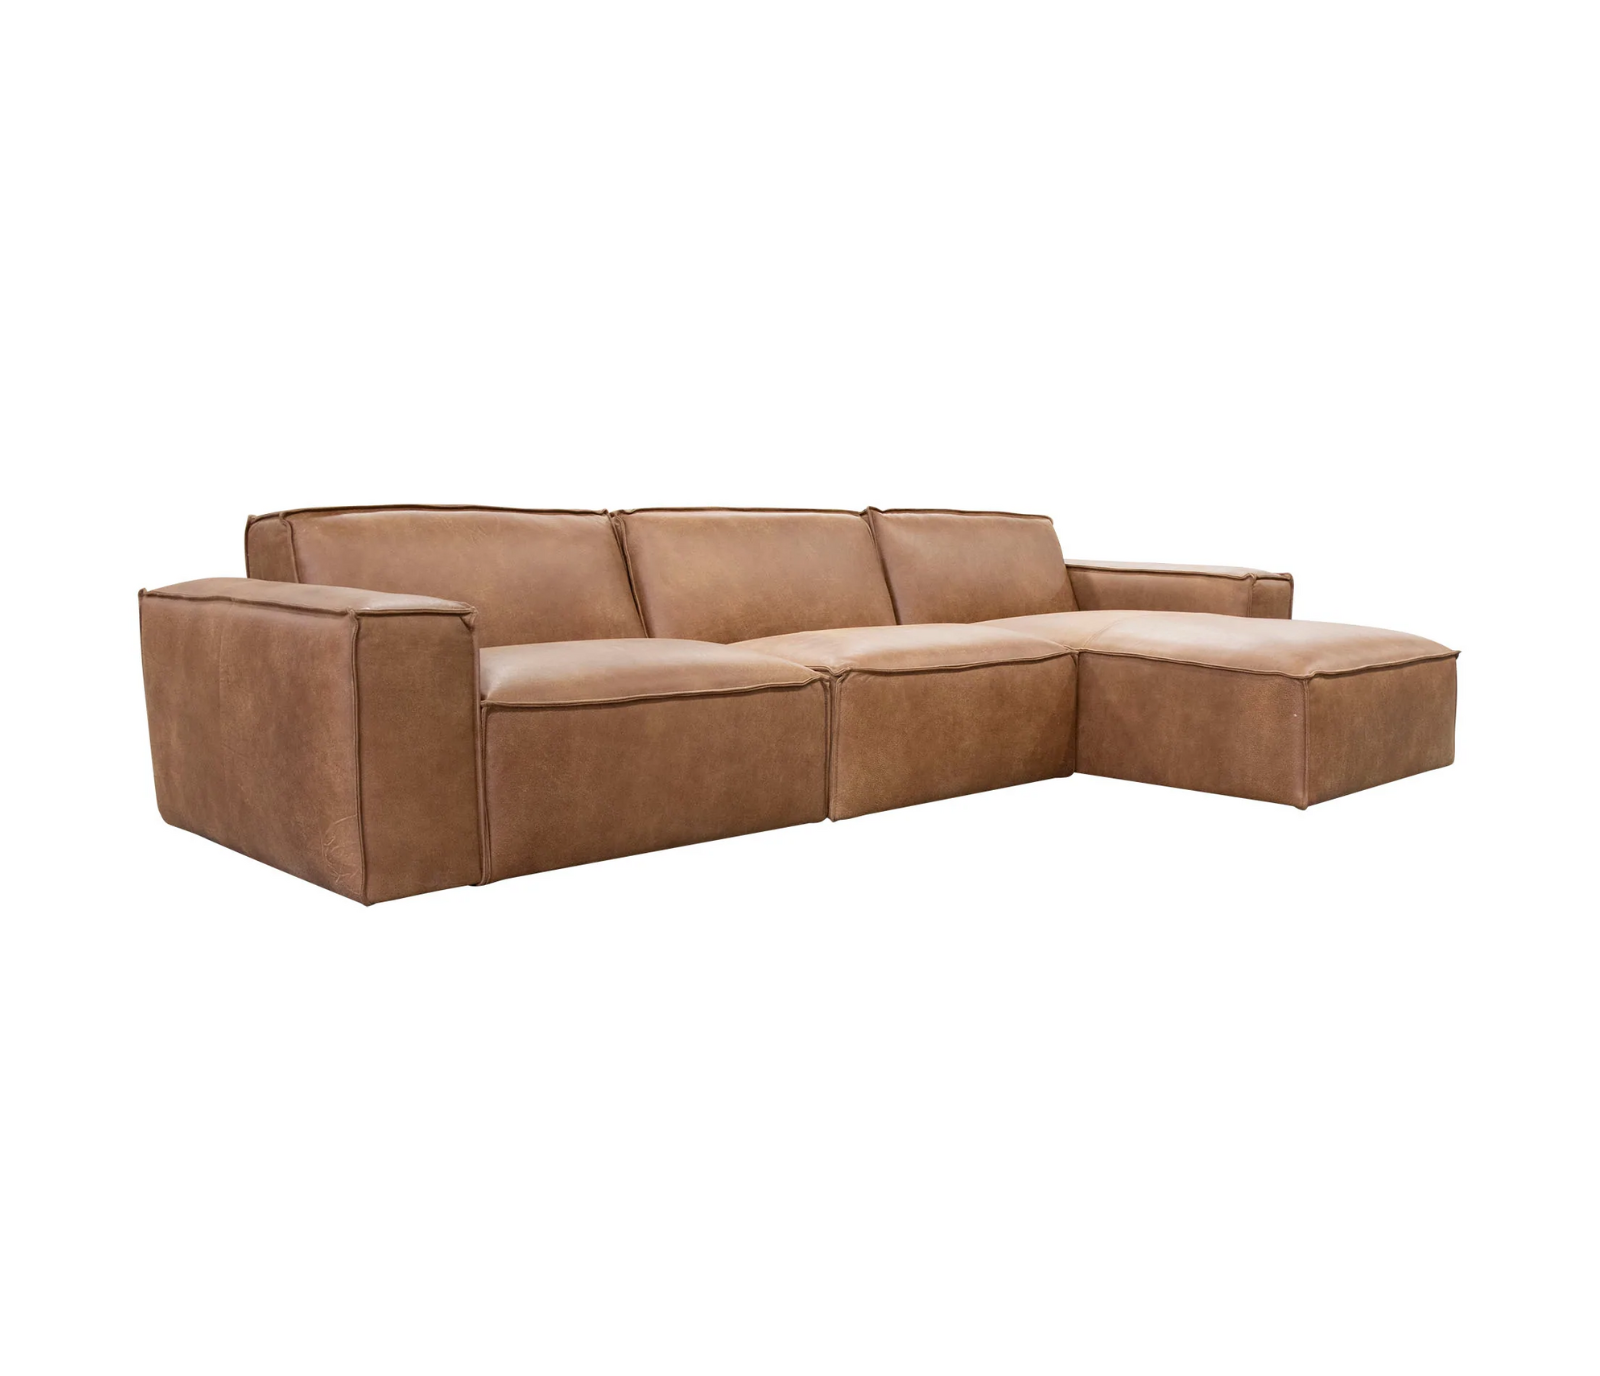 Bunny 3 Piece Sectional - Natural Cognac Leather